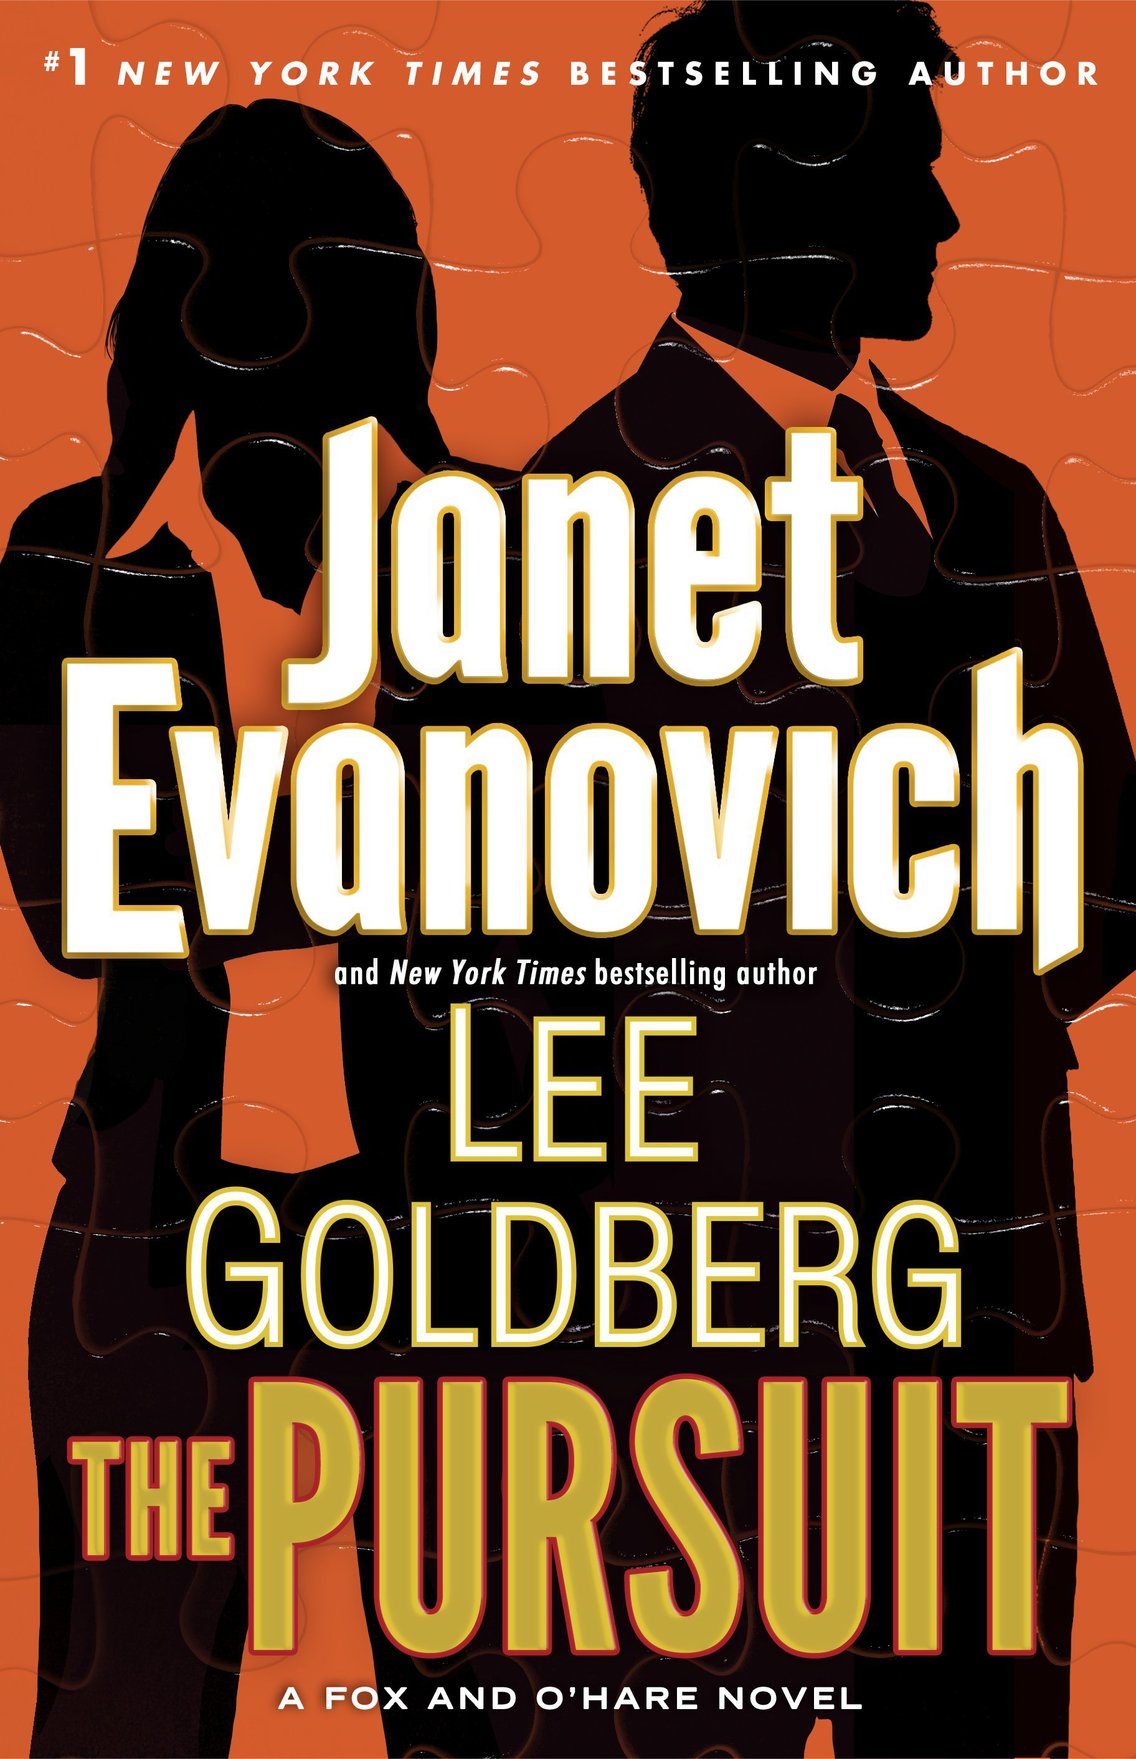 The Pursuit (2016) by Janet Evanovich